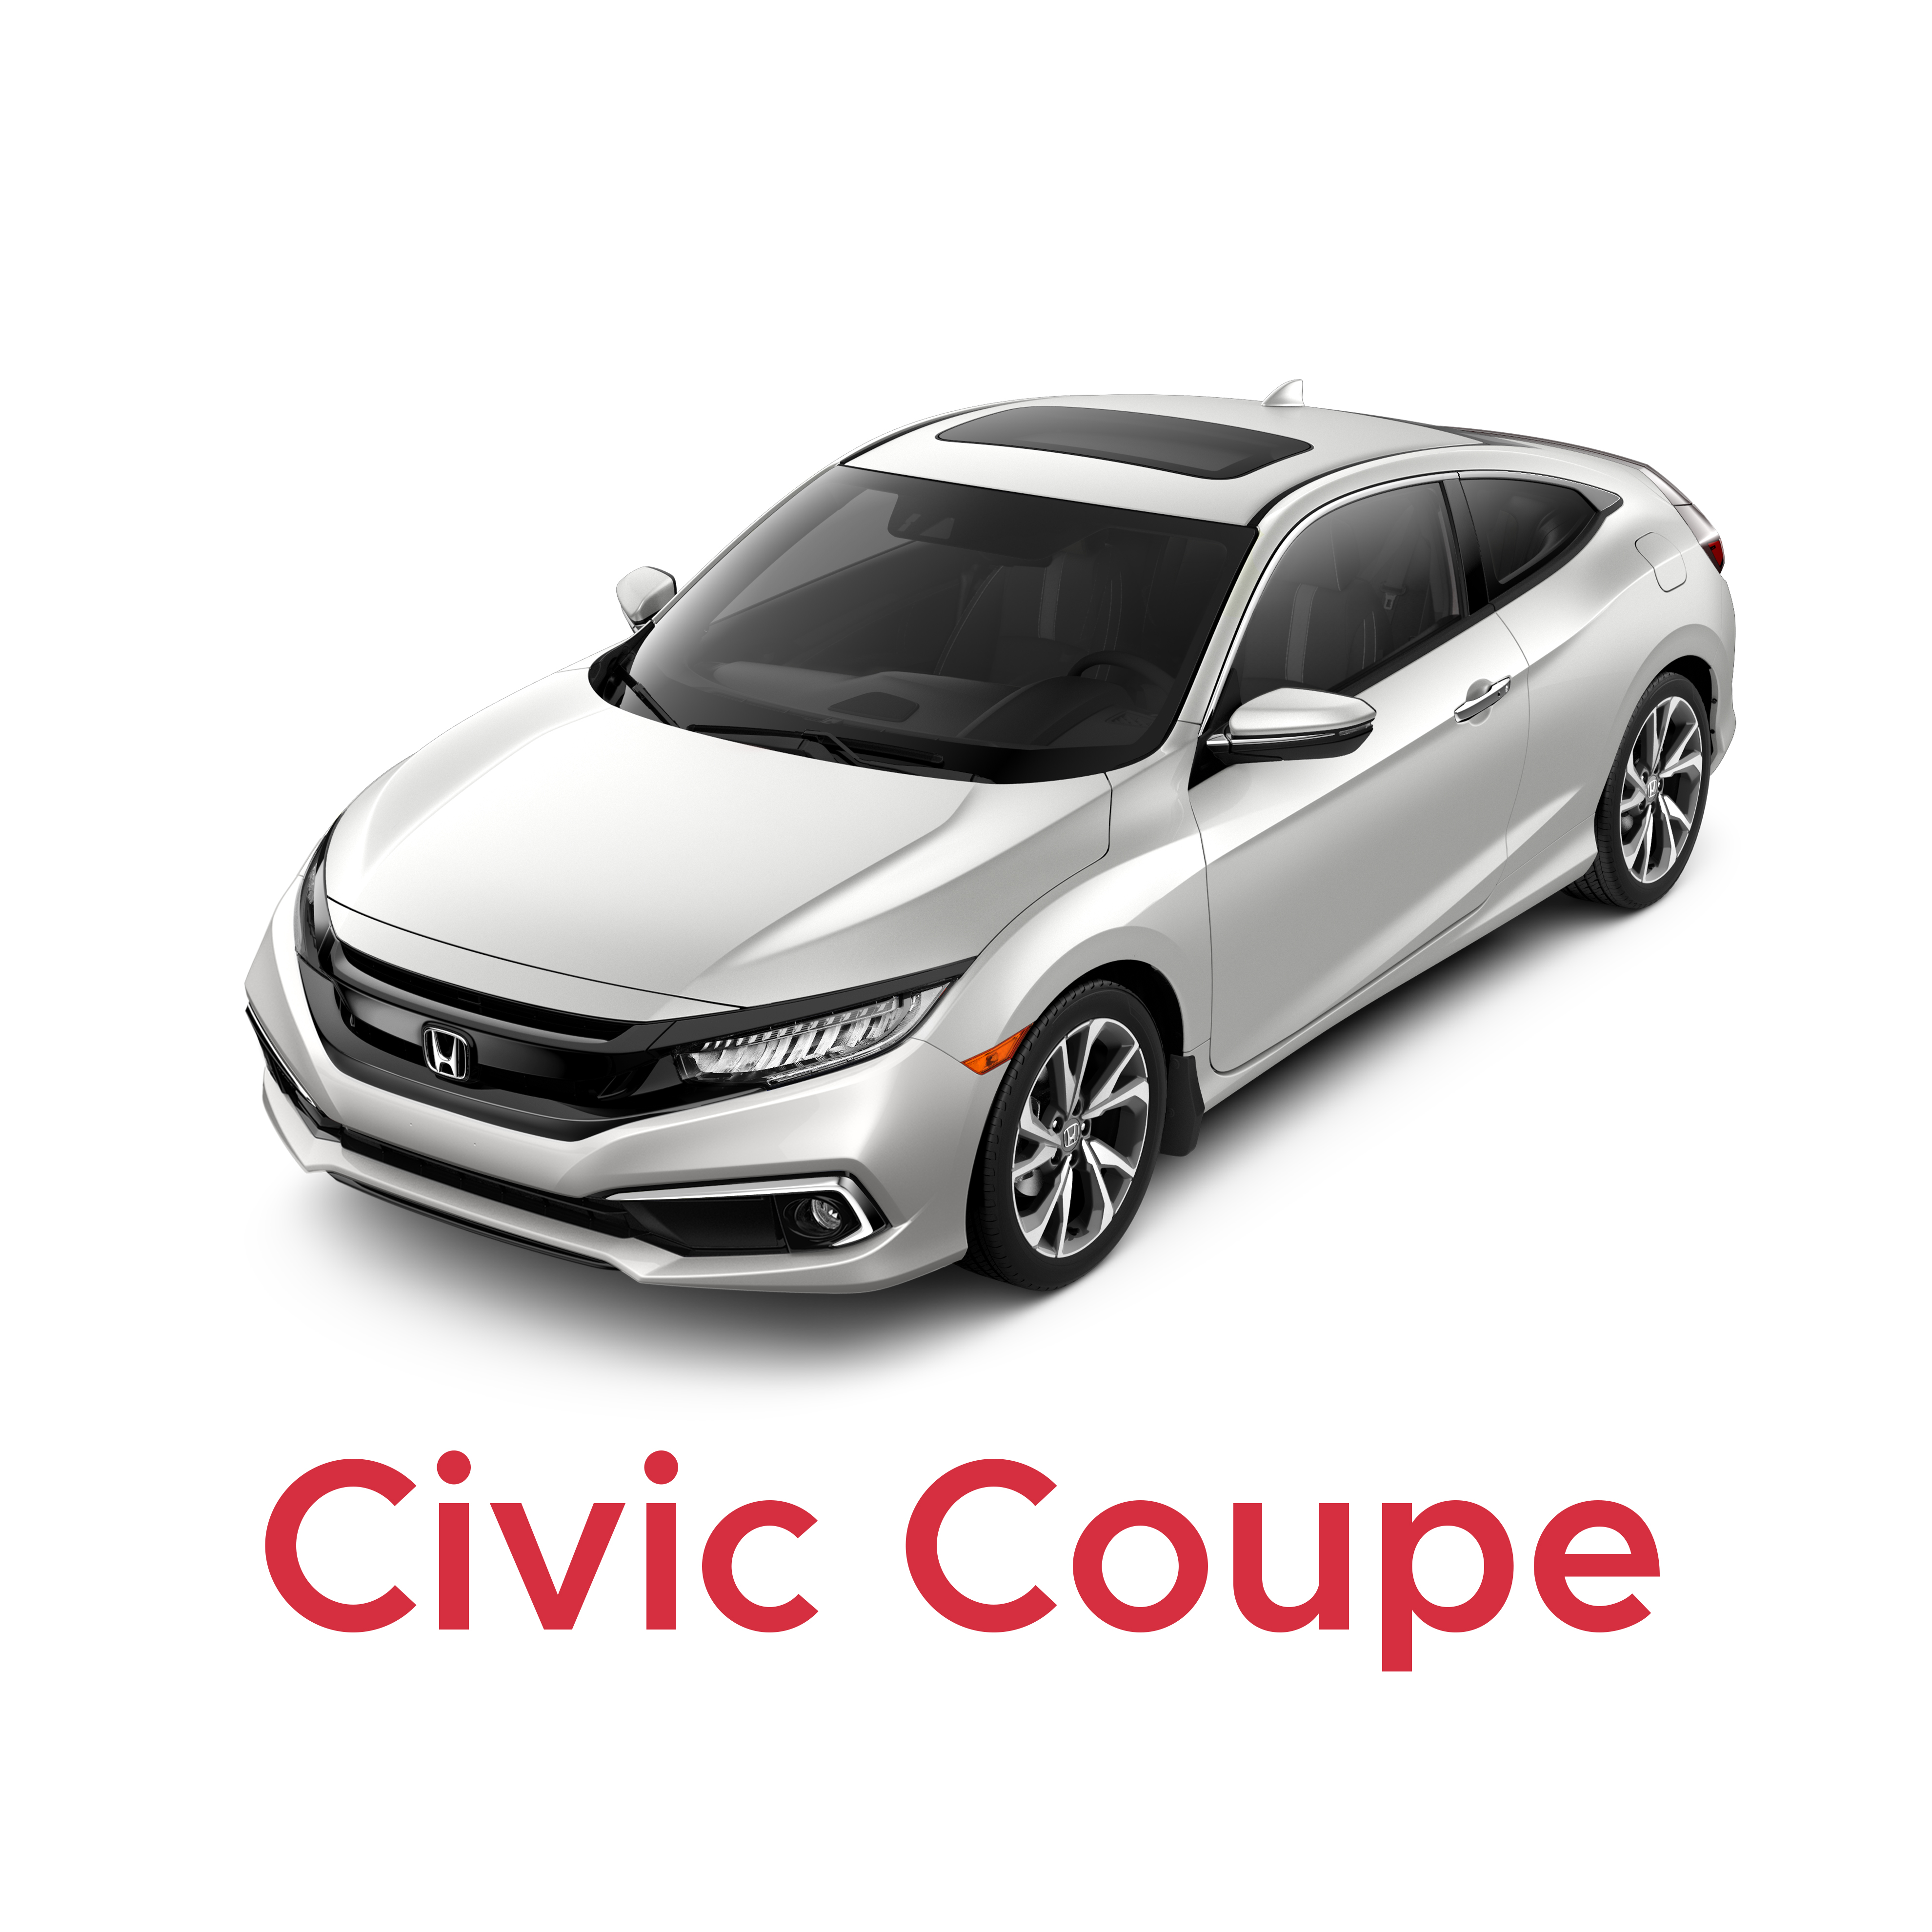 Civic Coupe